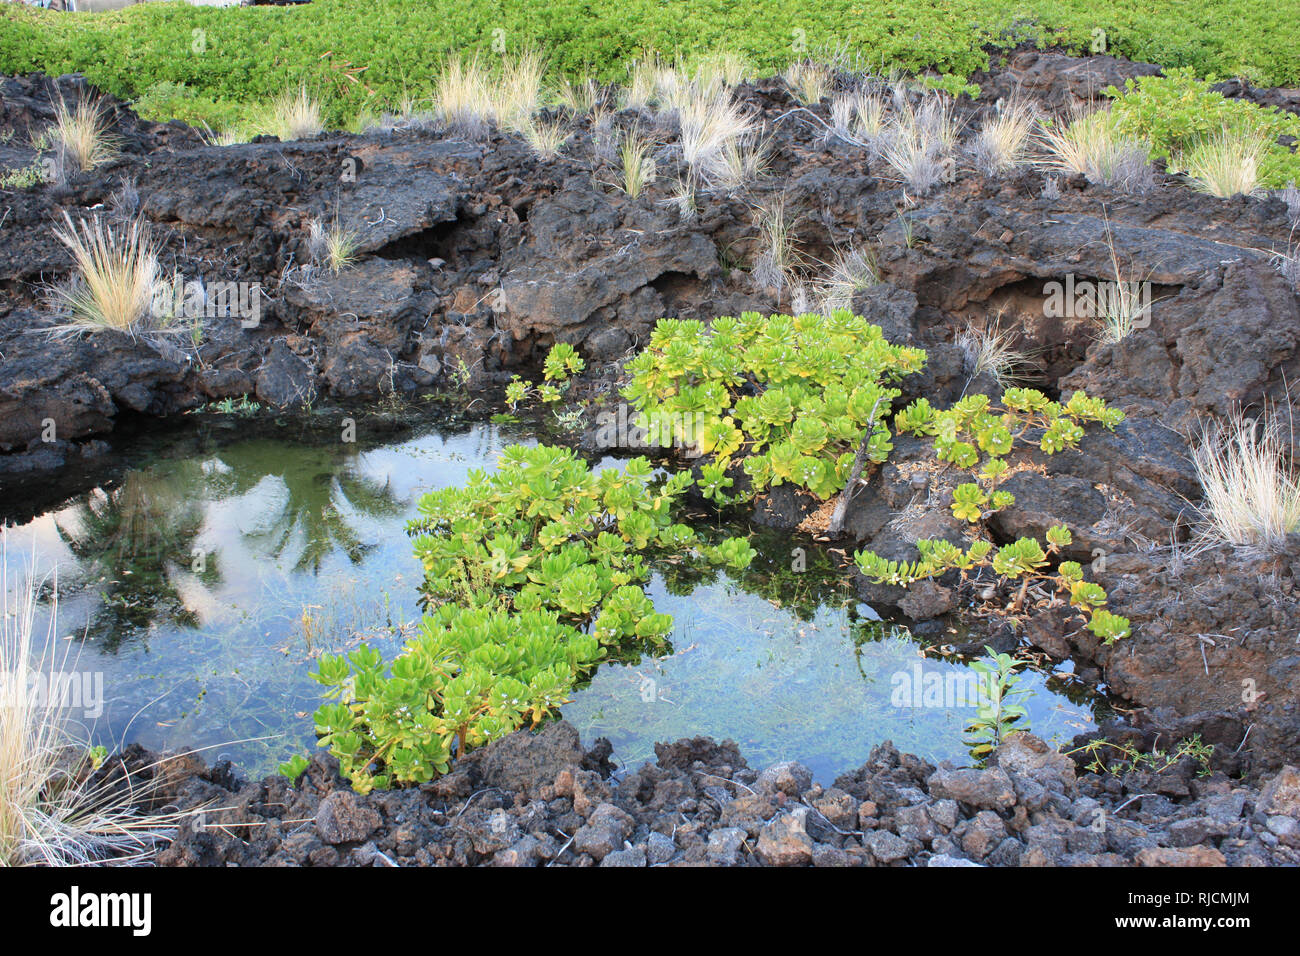 Tropical water plants, Water hyssop, and grasses growing in and on a pond formed from volcanic rock, in Hawaii, USA Stock Photo